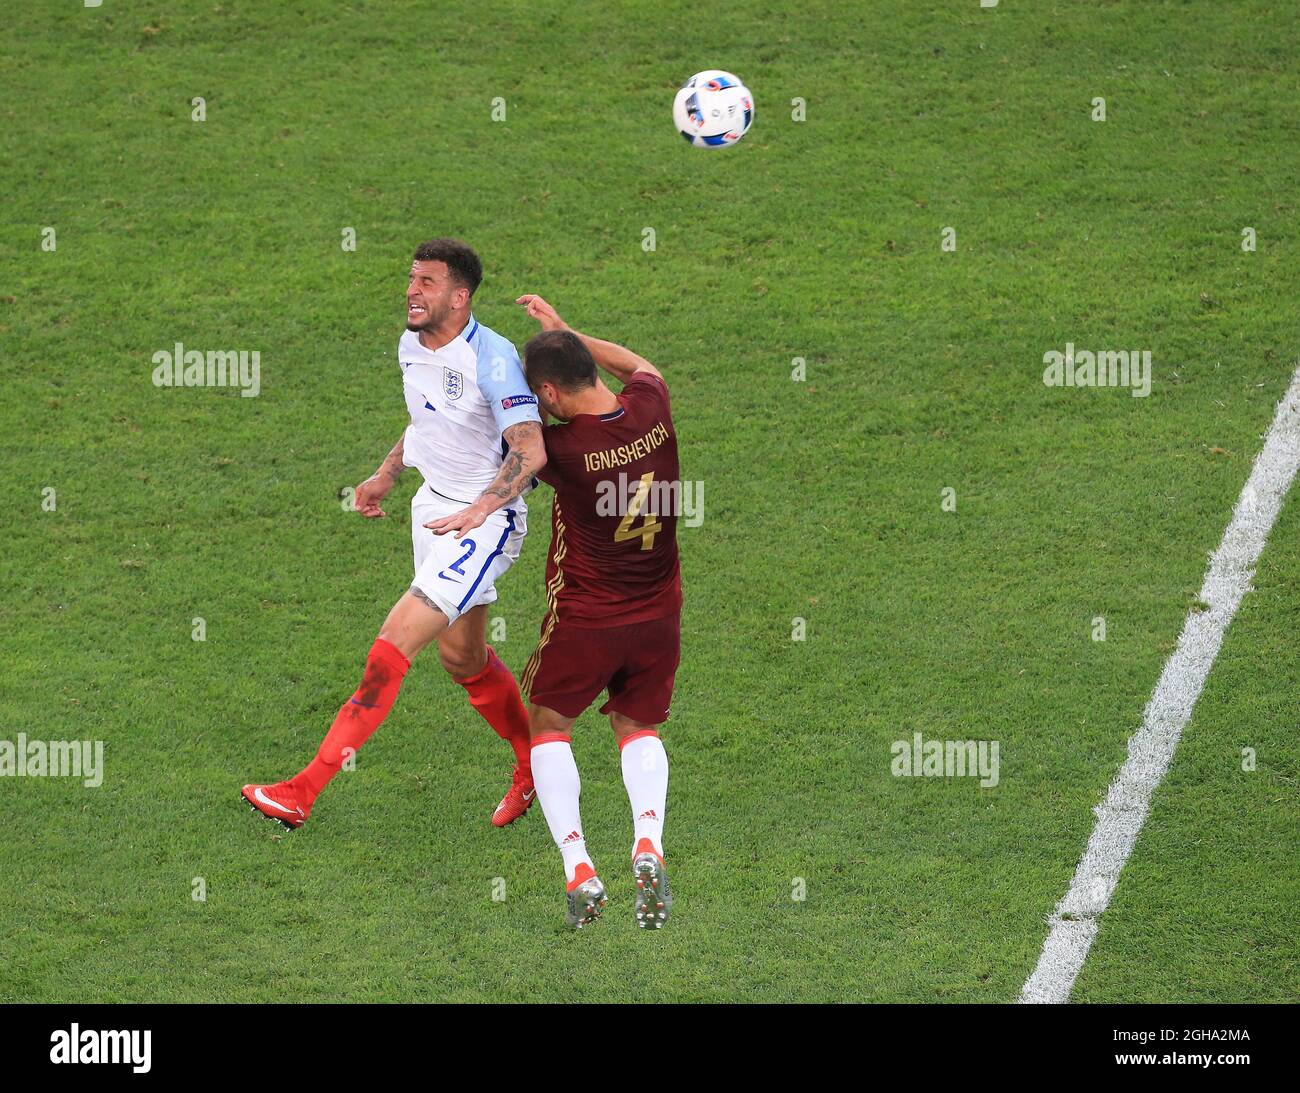 Kyle Walker of England gets above Sergei Ignashevich of Russia to won the ball during the UEFA European Championship 2016 match at the Stade Velodrome, Marseille. Picture date June 11th, 2016 Pic David Klein/Sportimage via PA Images Stock Photo